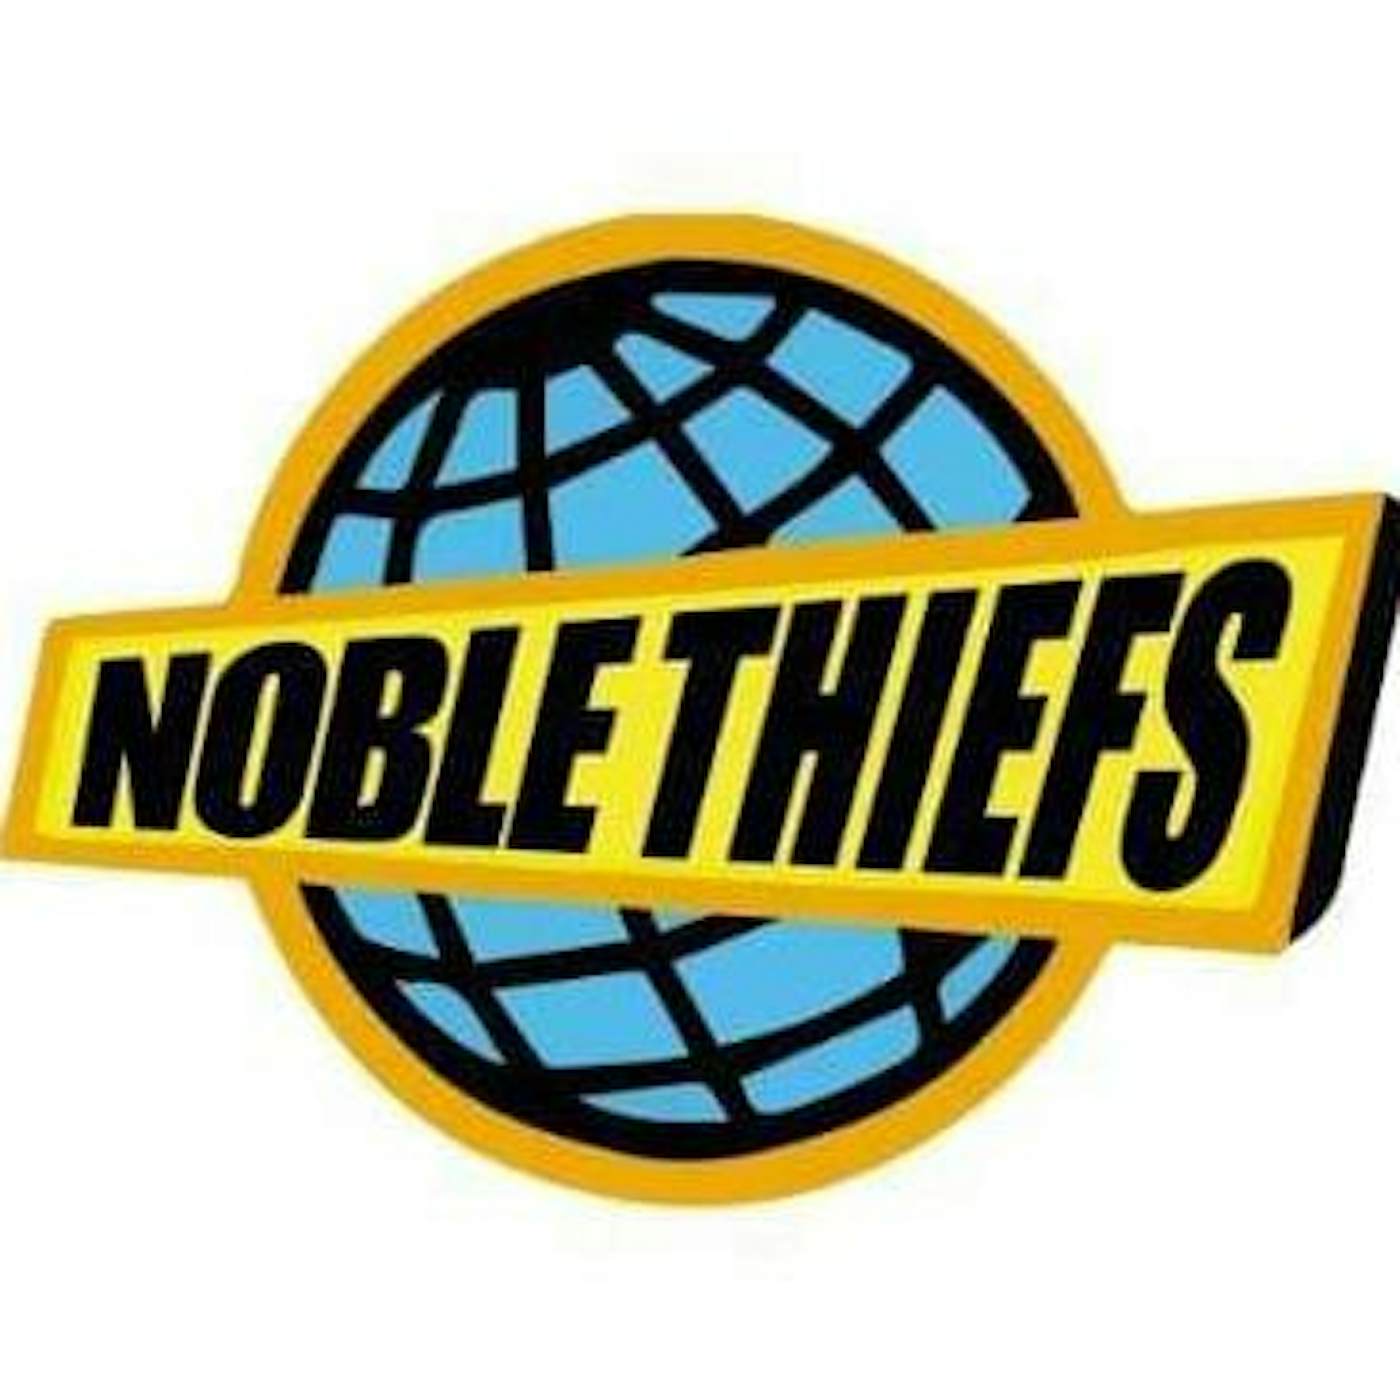 The Noble Thiefs